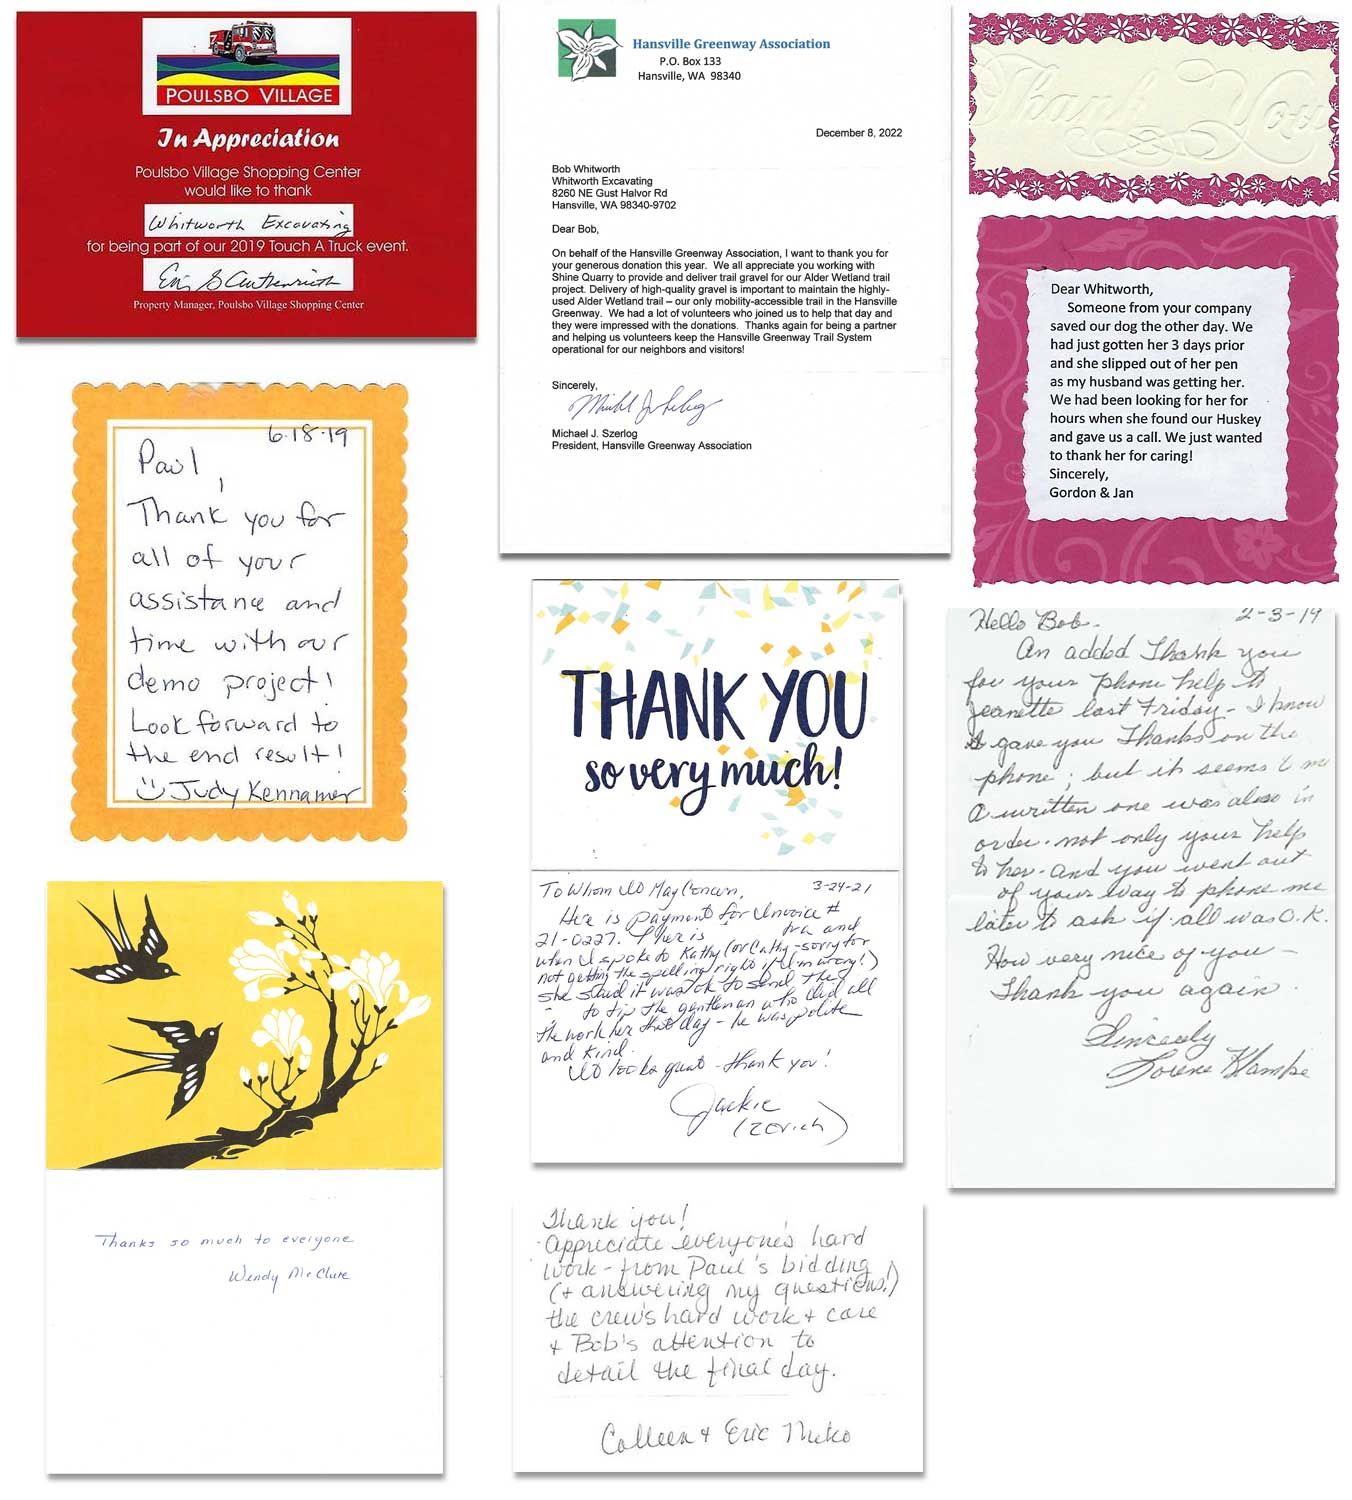 Whitworth Excavating Client Reviews and Thank You Cards